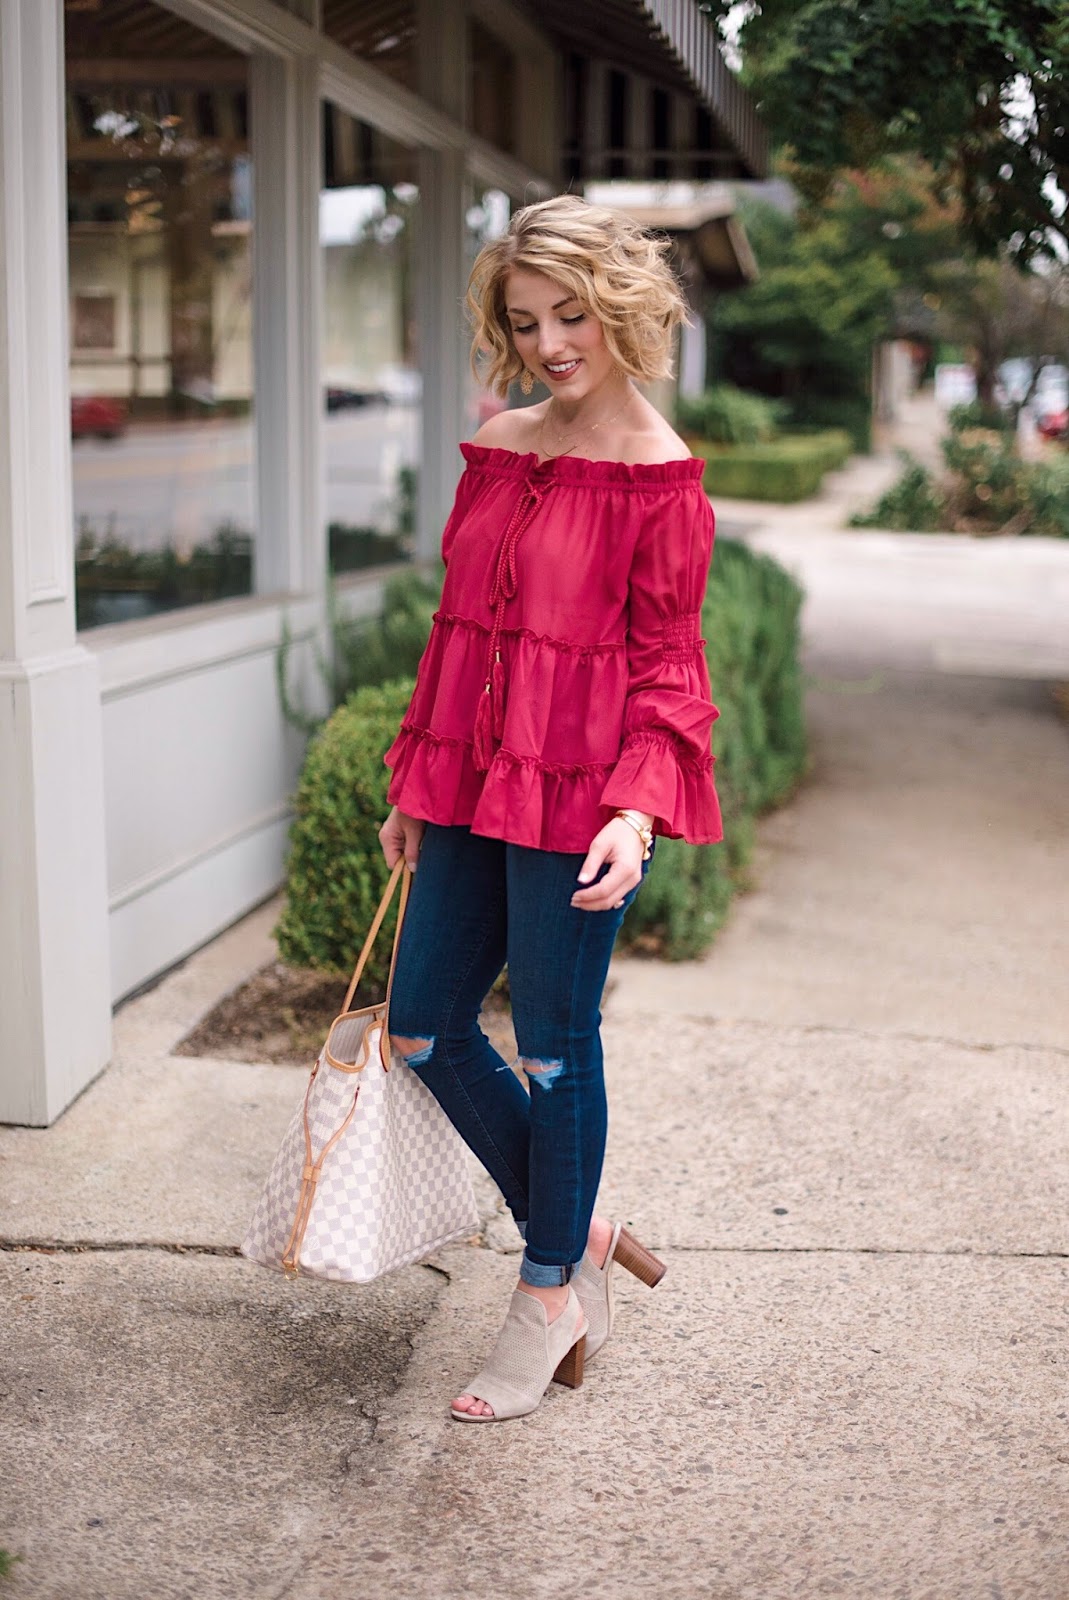 Transitioning to Fall Look - Something Delightful Blog